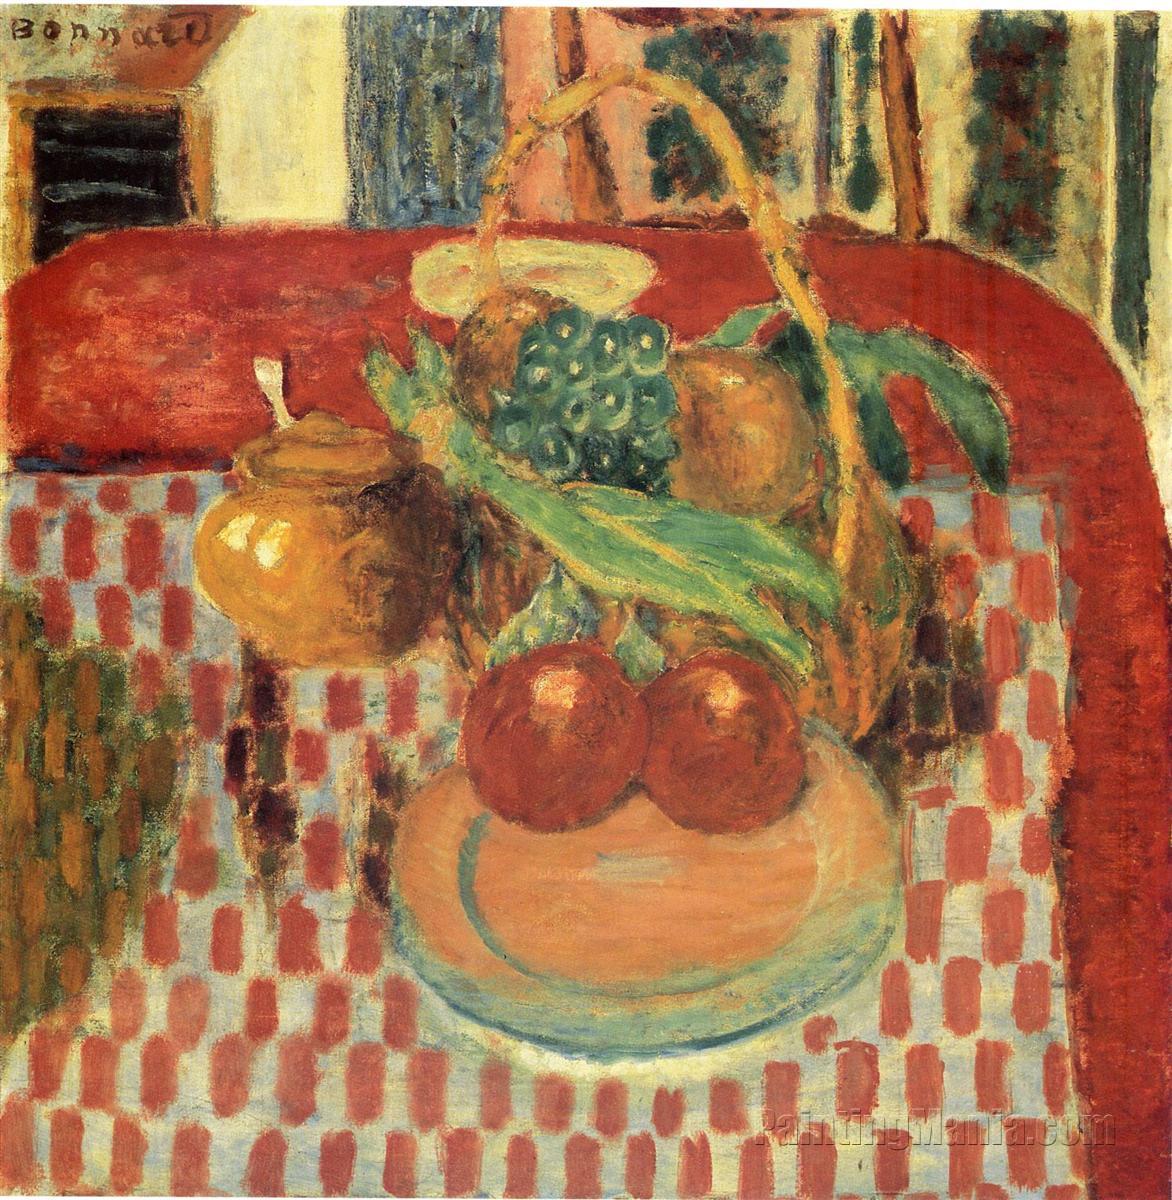 Basket and Plate of Fruit on a Red Checkered Tablecloth